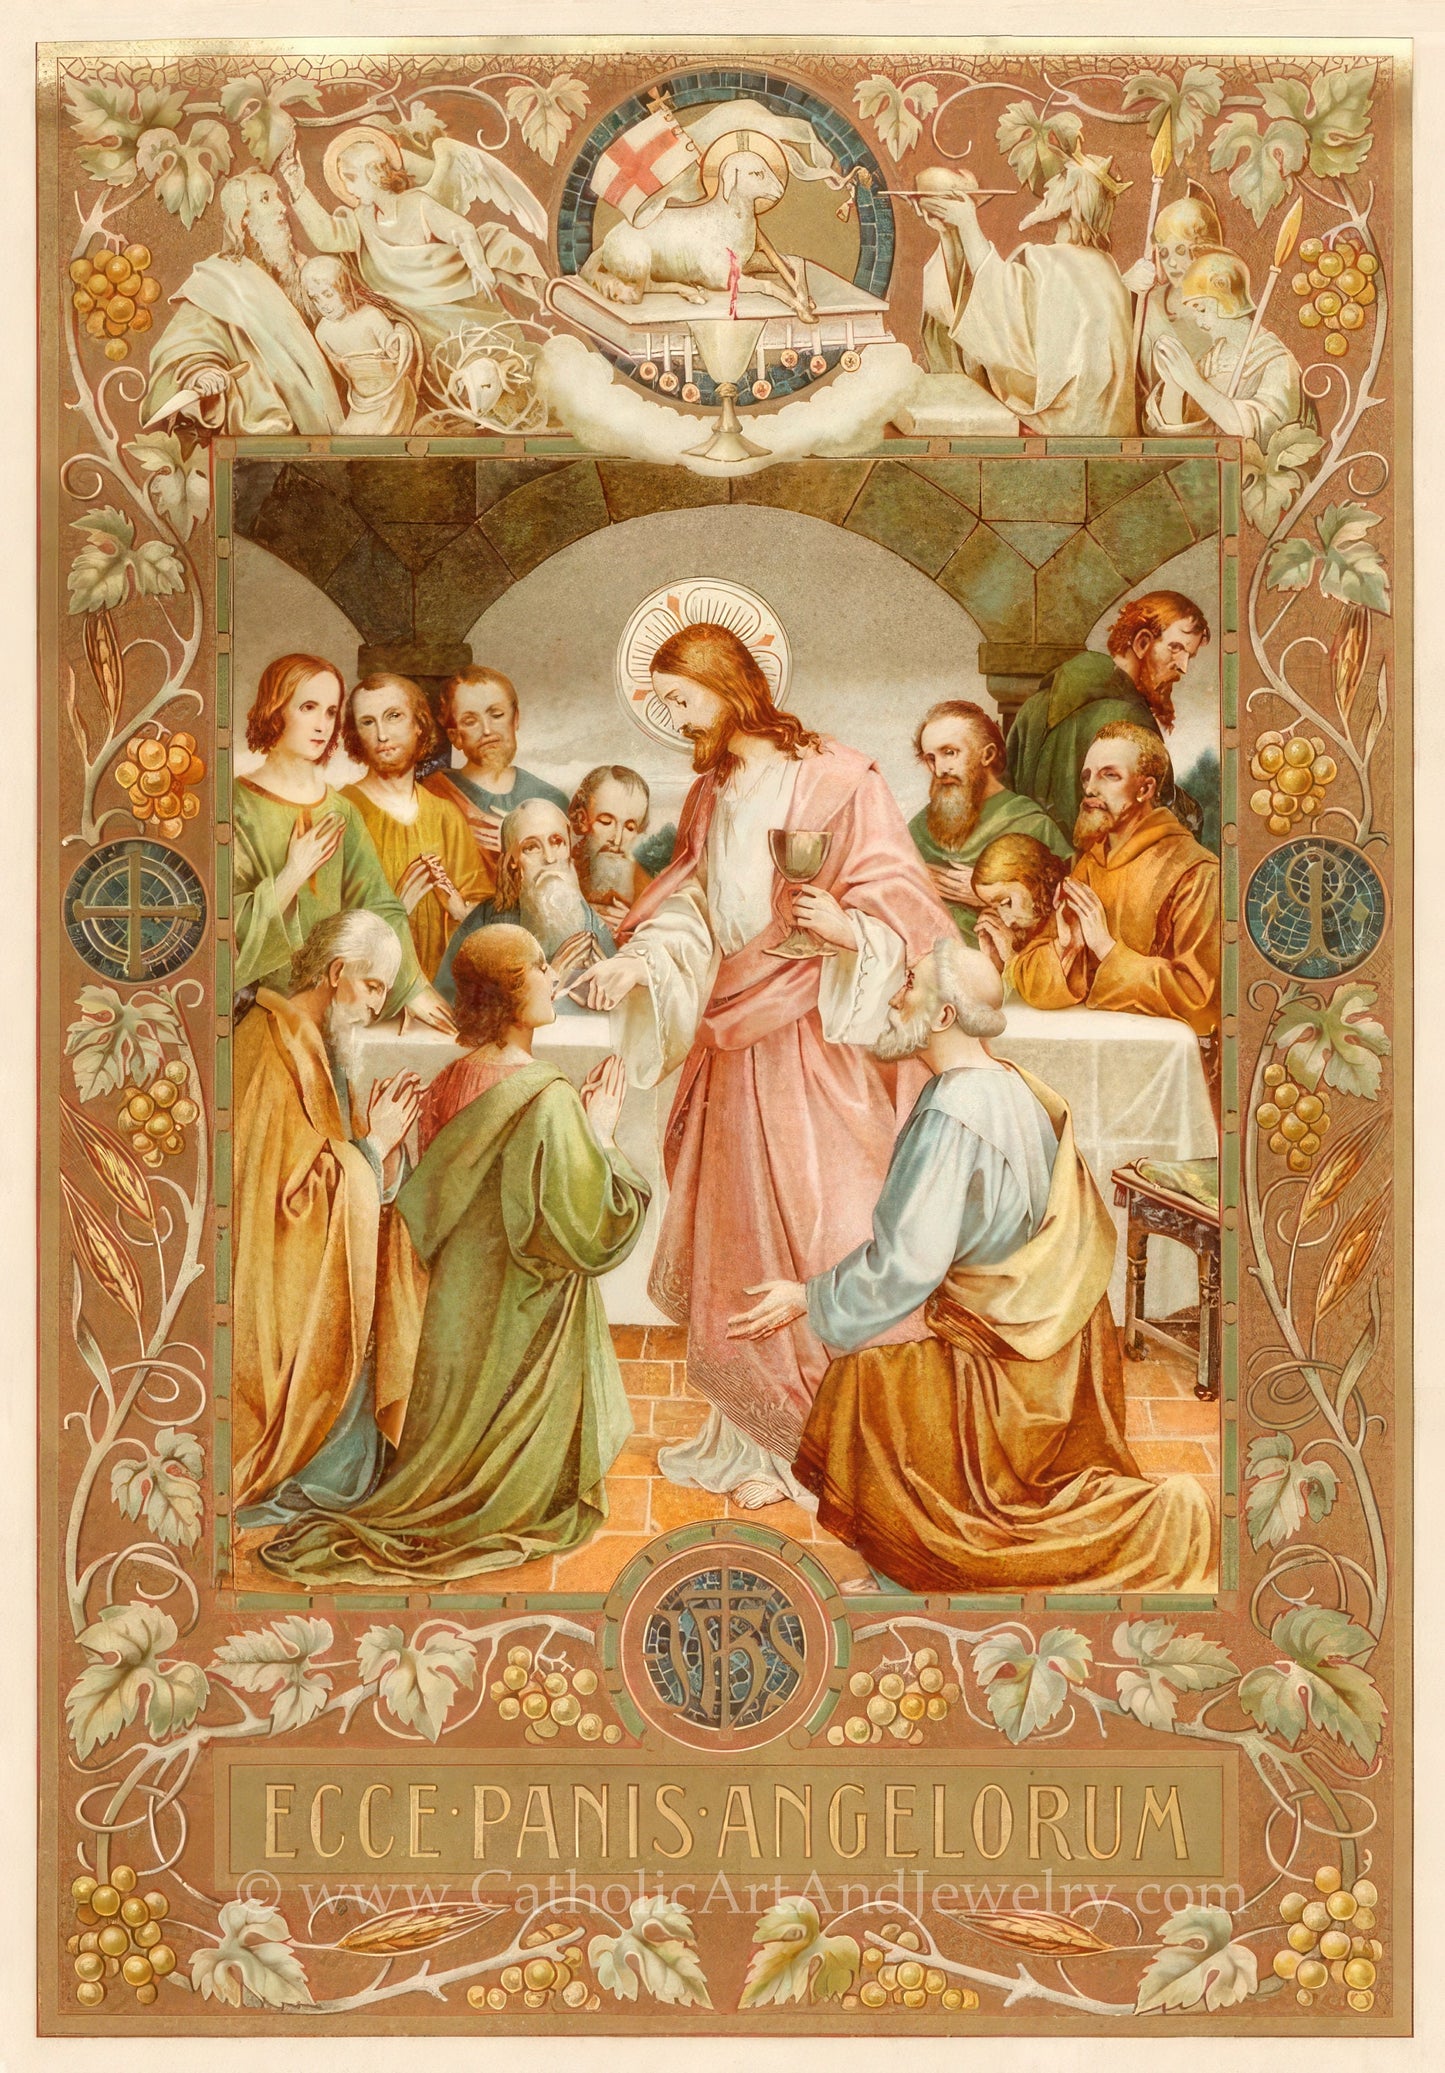 New! Behold, the Bread of Angels! – Early 20th Century Catholic Art – Catholic Gift – Archival Quality